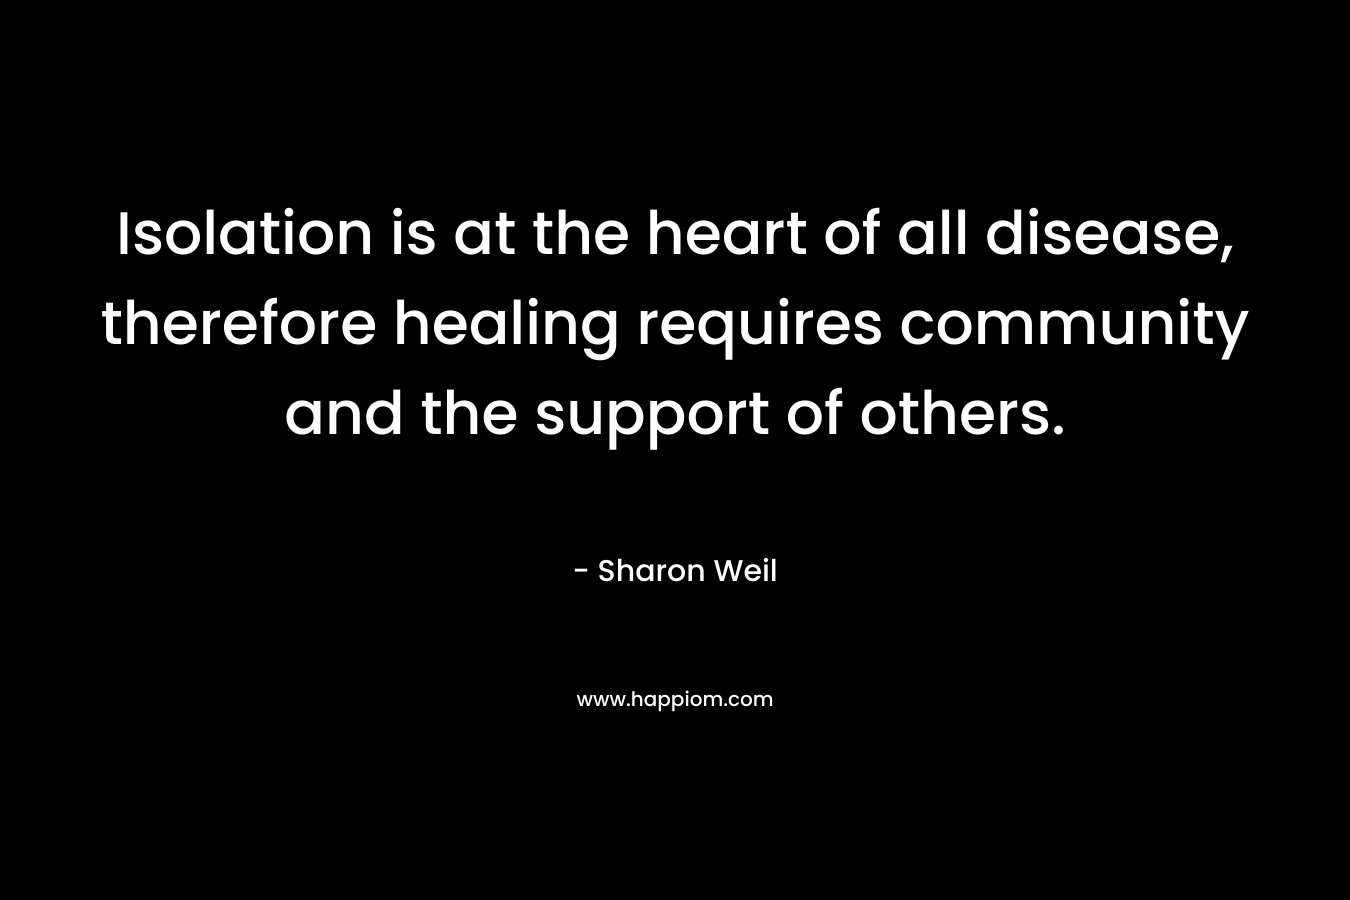 Isolation is at the heart of all disease, therefore healing requires community and the support of others. – Sharon Weil